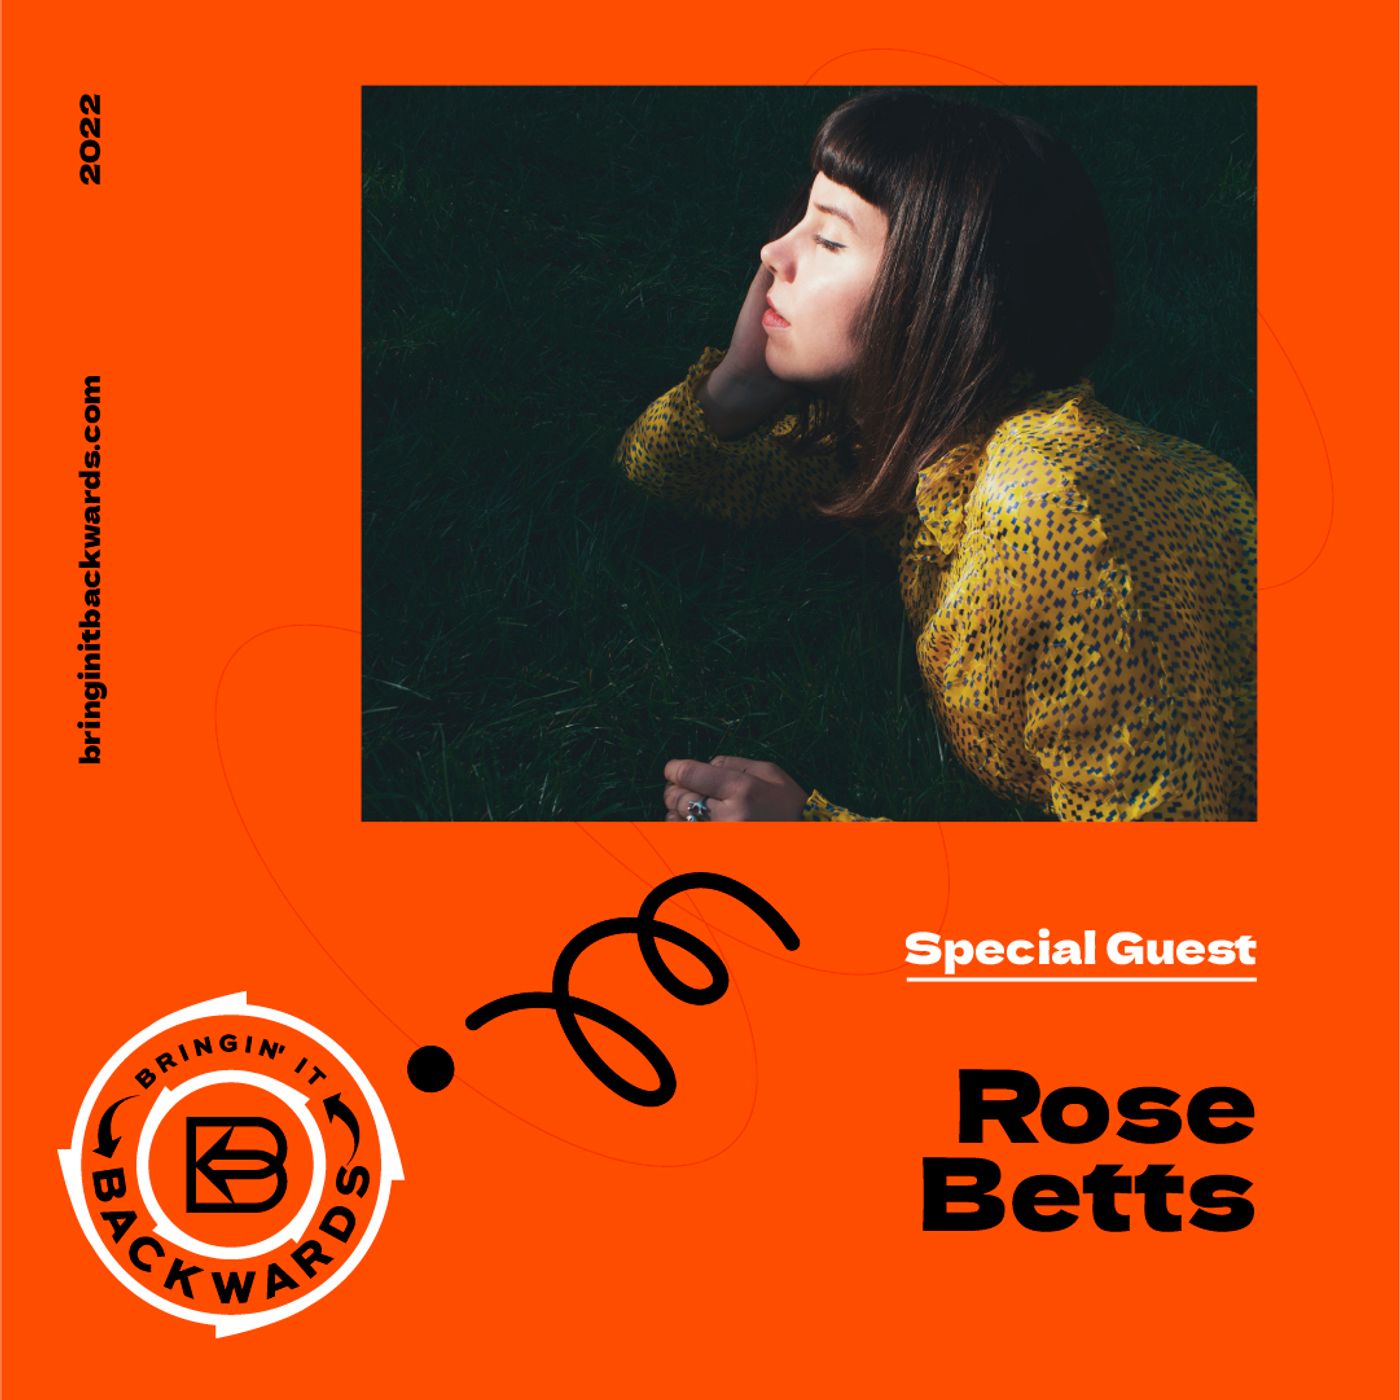 Interview with Rose Betts